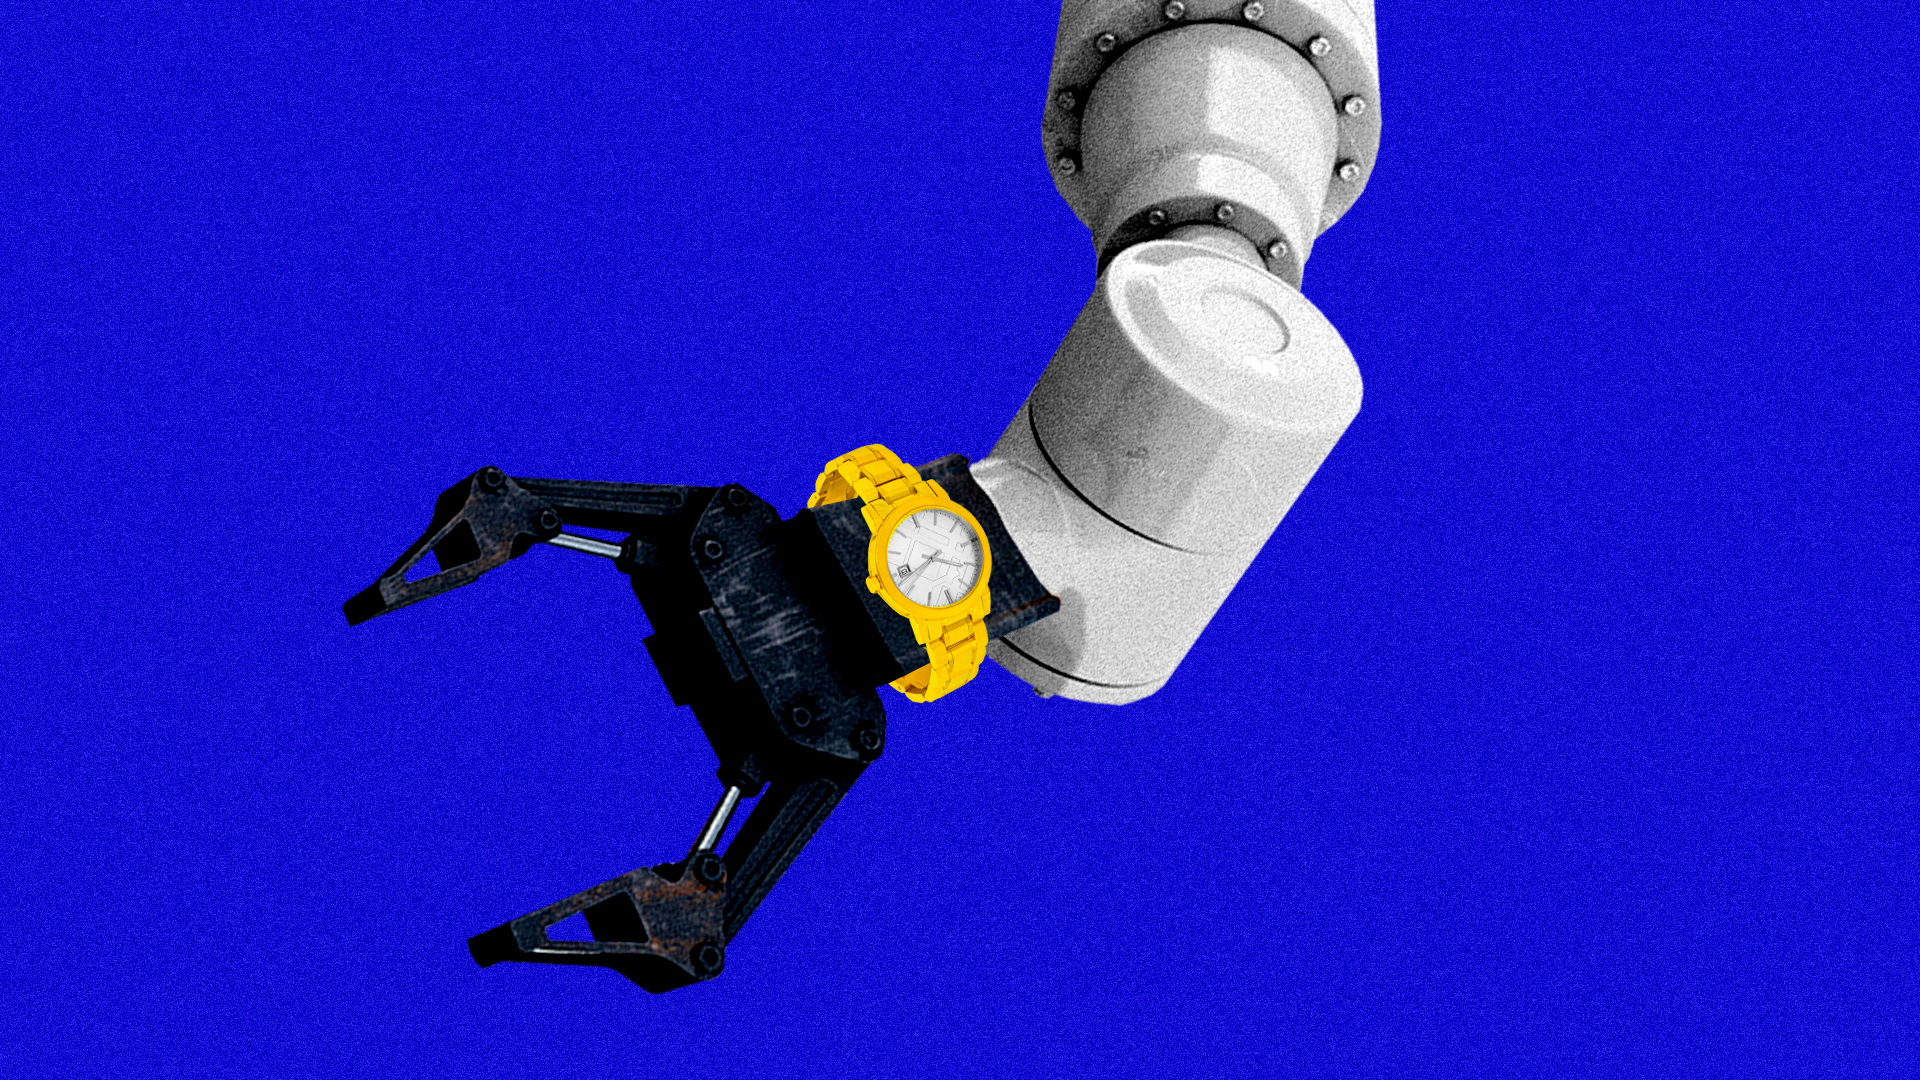 Illustration of a robot arm wearing a watch